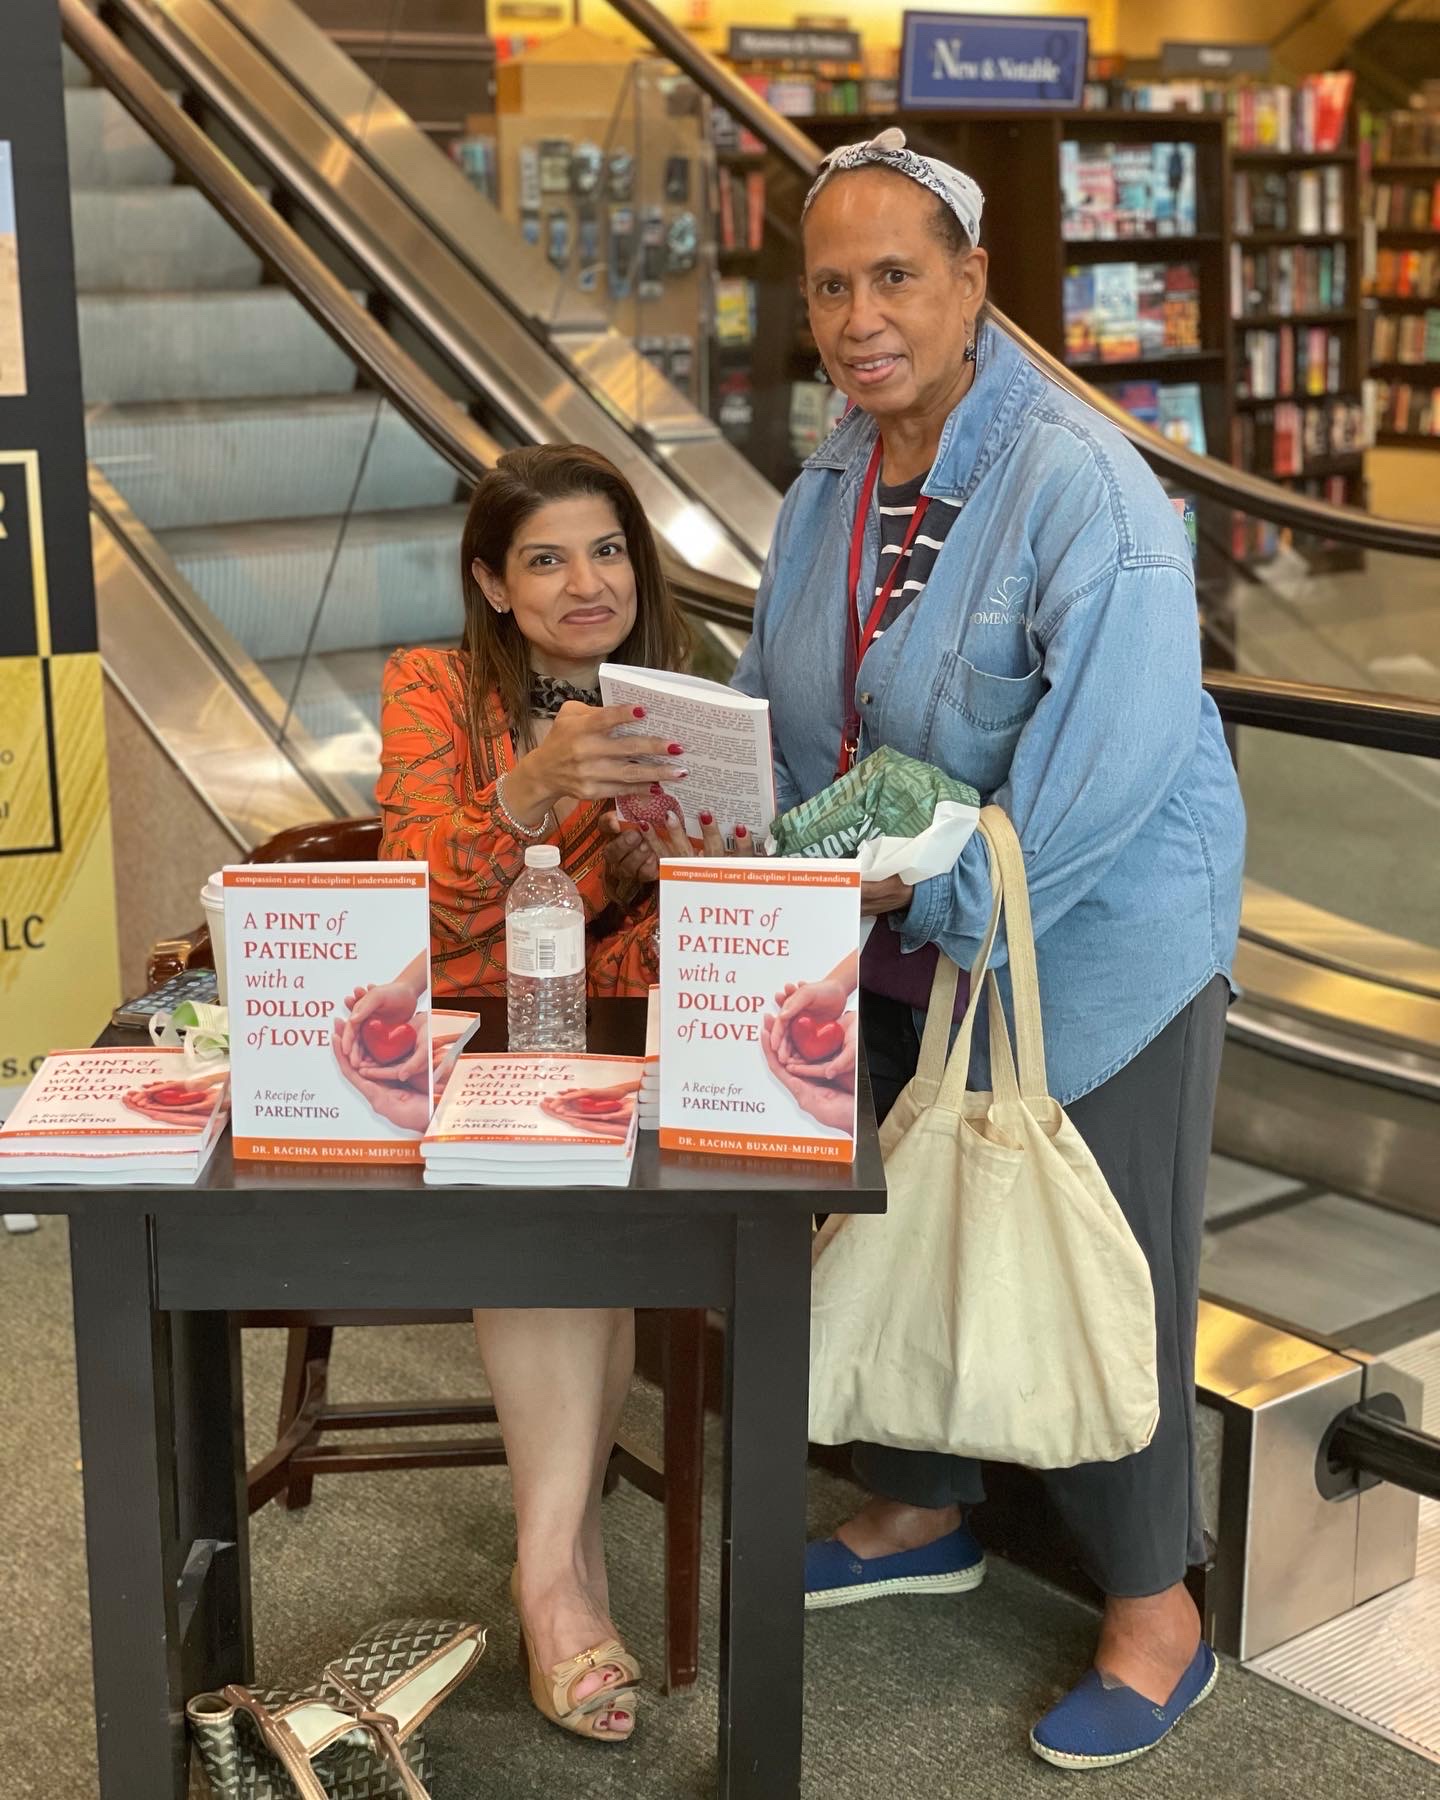 Dr. Rachna book signing at Barnes & Noble Kendall!